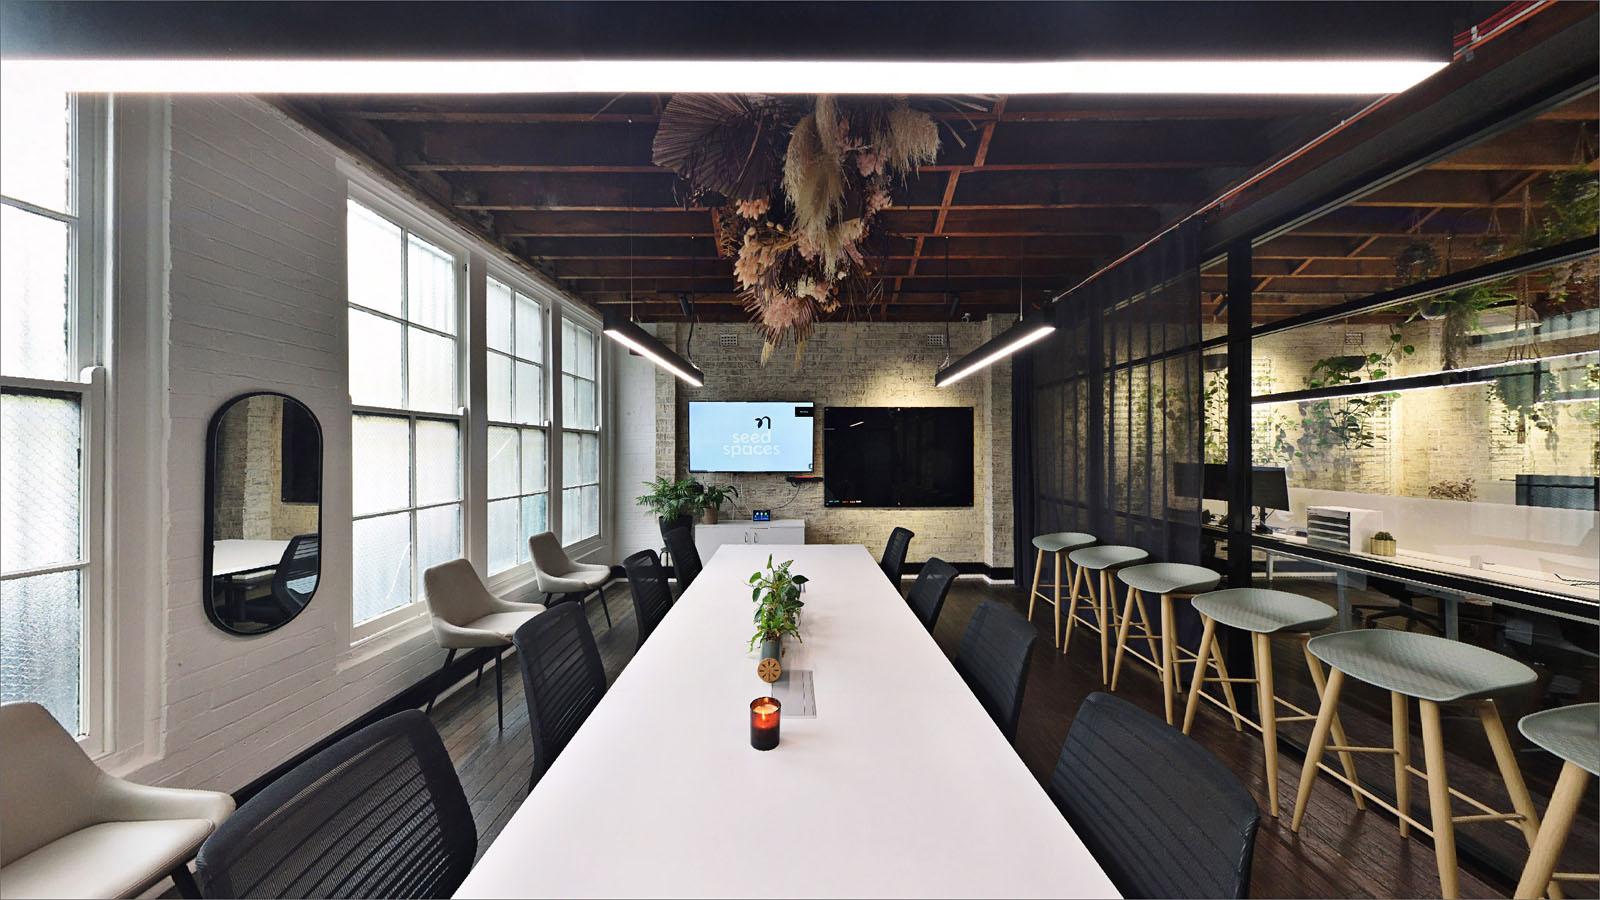 The Boardroom at a Coworking and Event space in Sydney. 360° virtual tour photography.